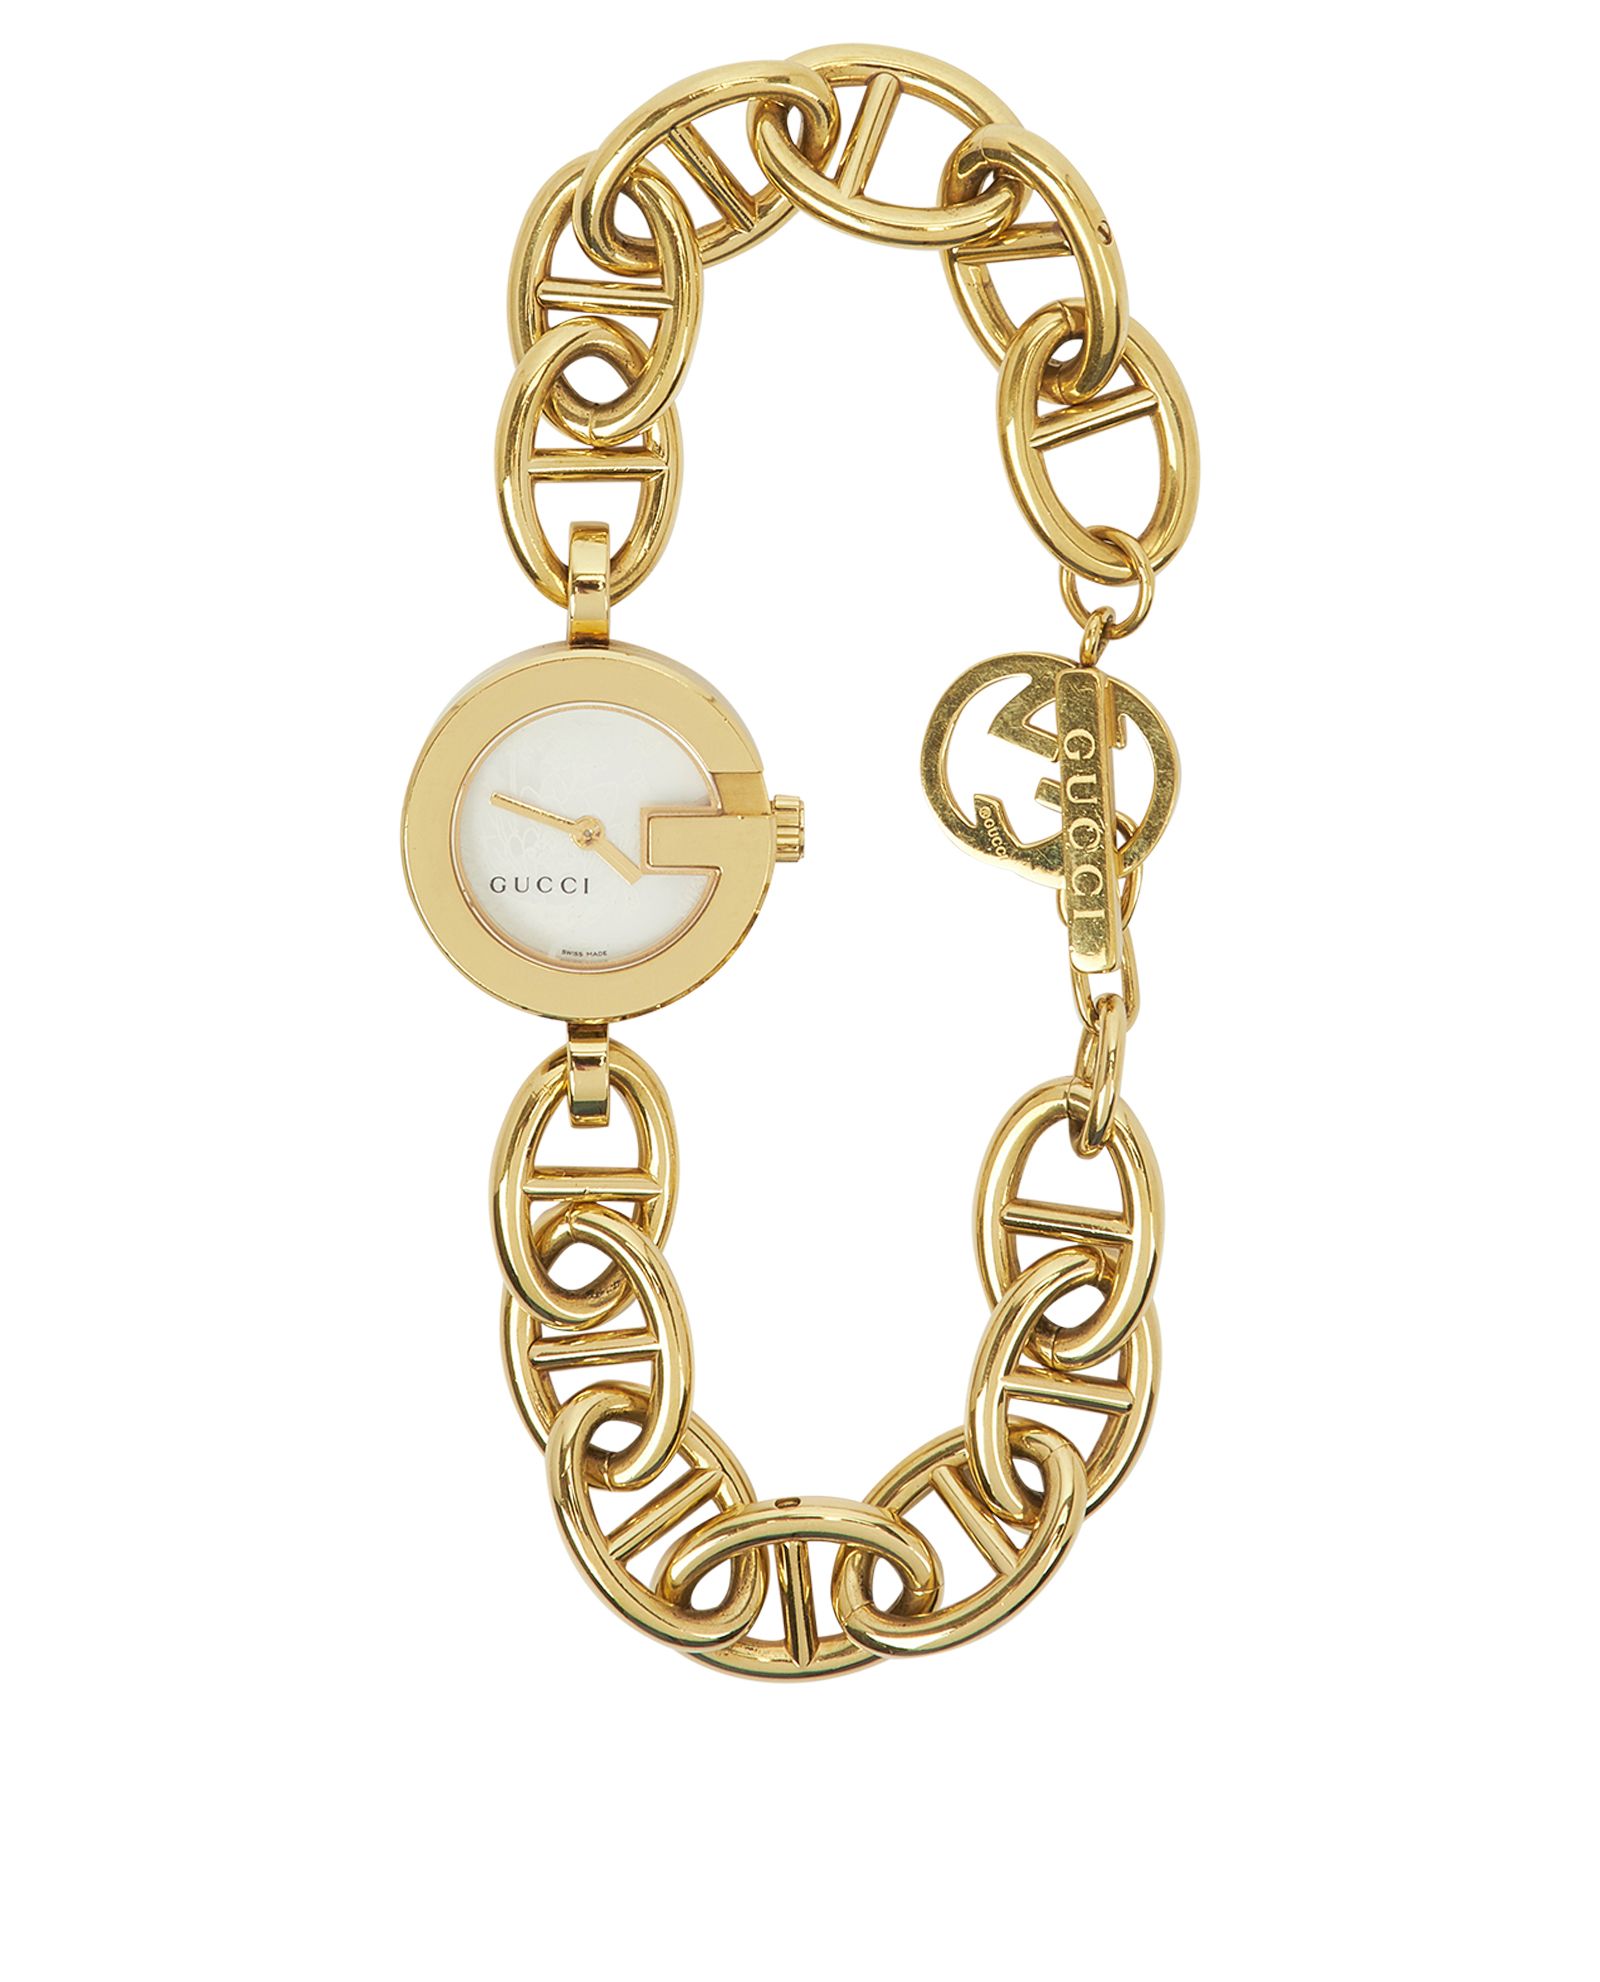 Gucci Lotus Charm Watch 107 Series, Gucci Watches - Designer Exchange | Buy  Sell Exchange